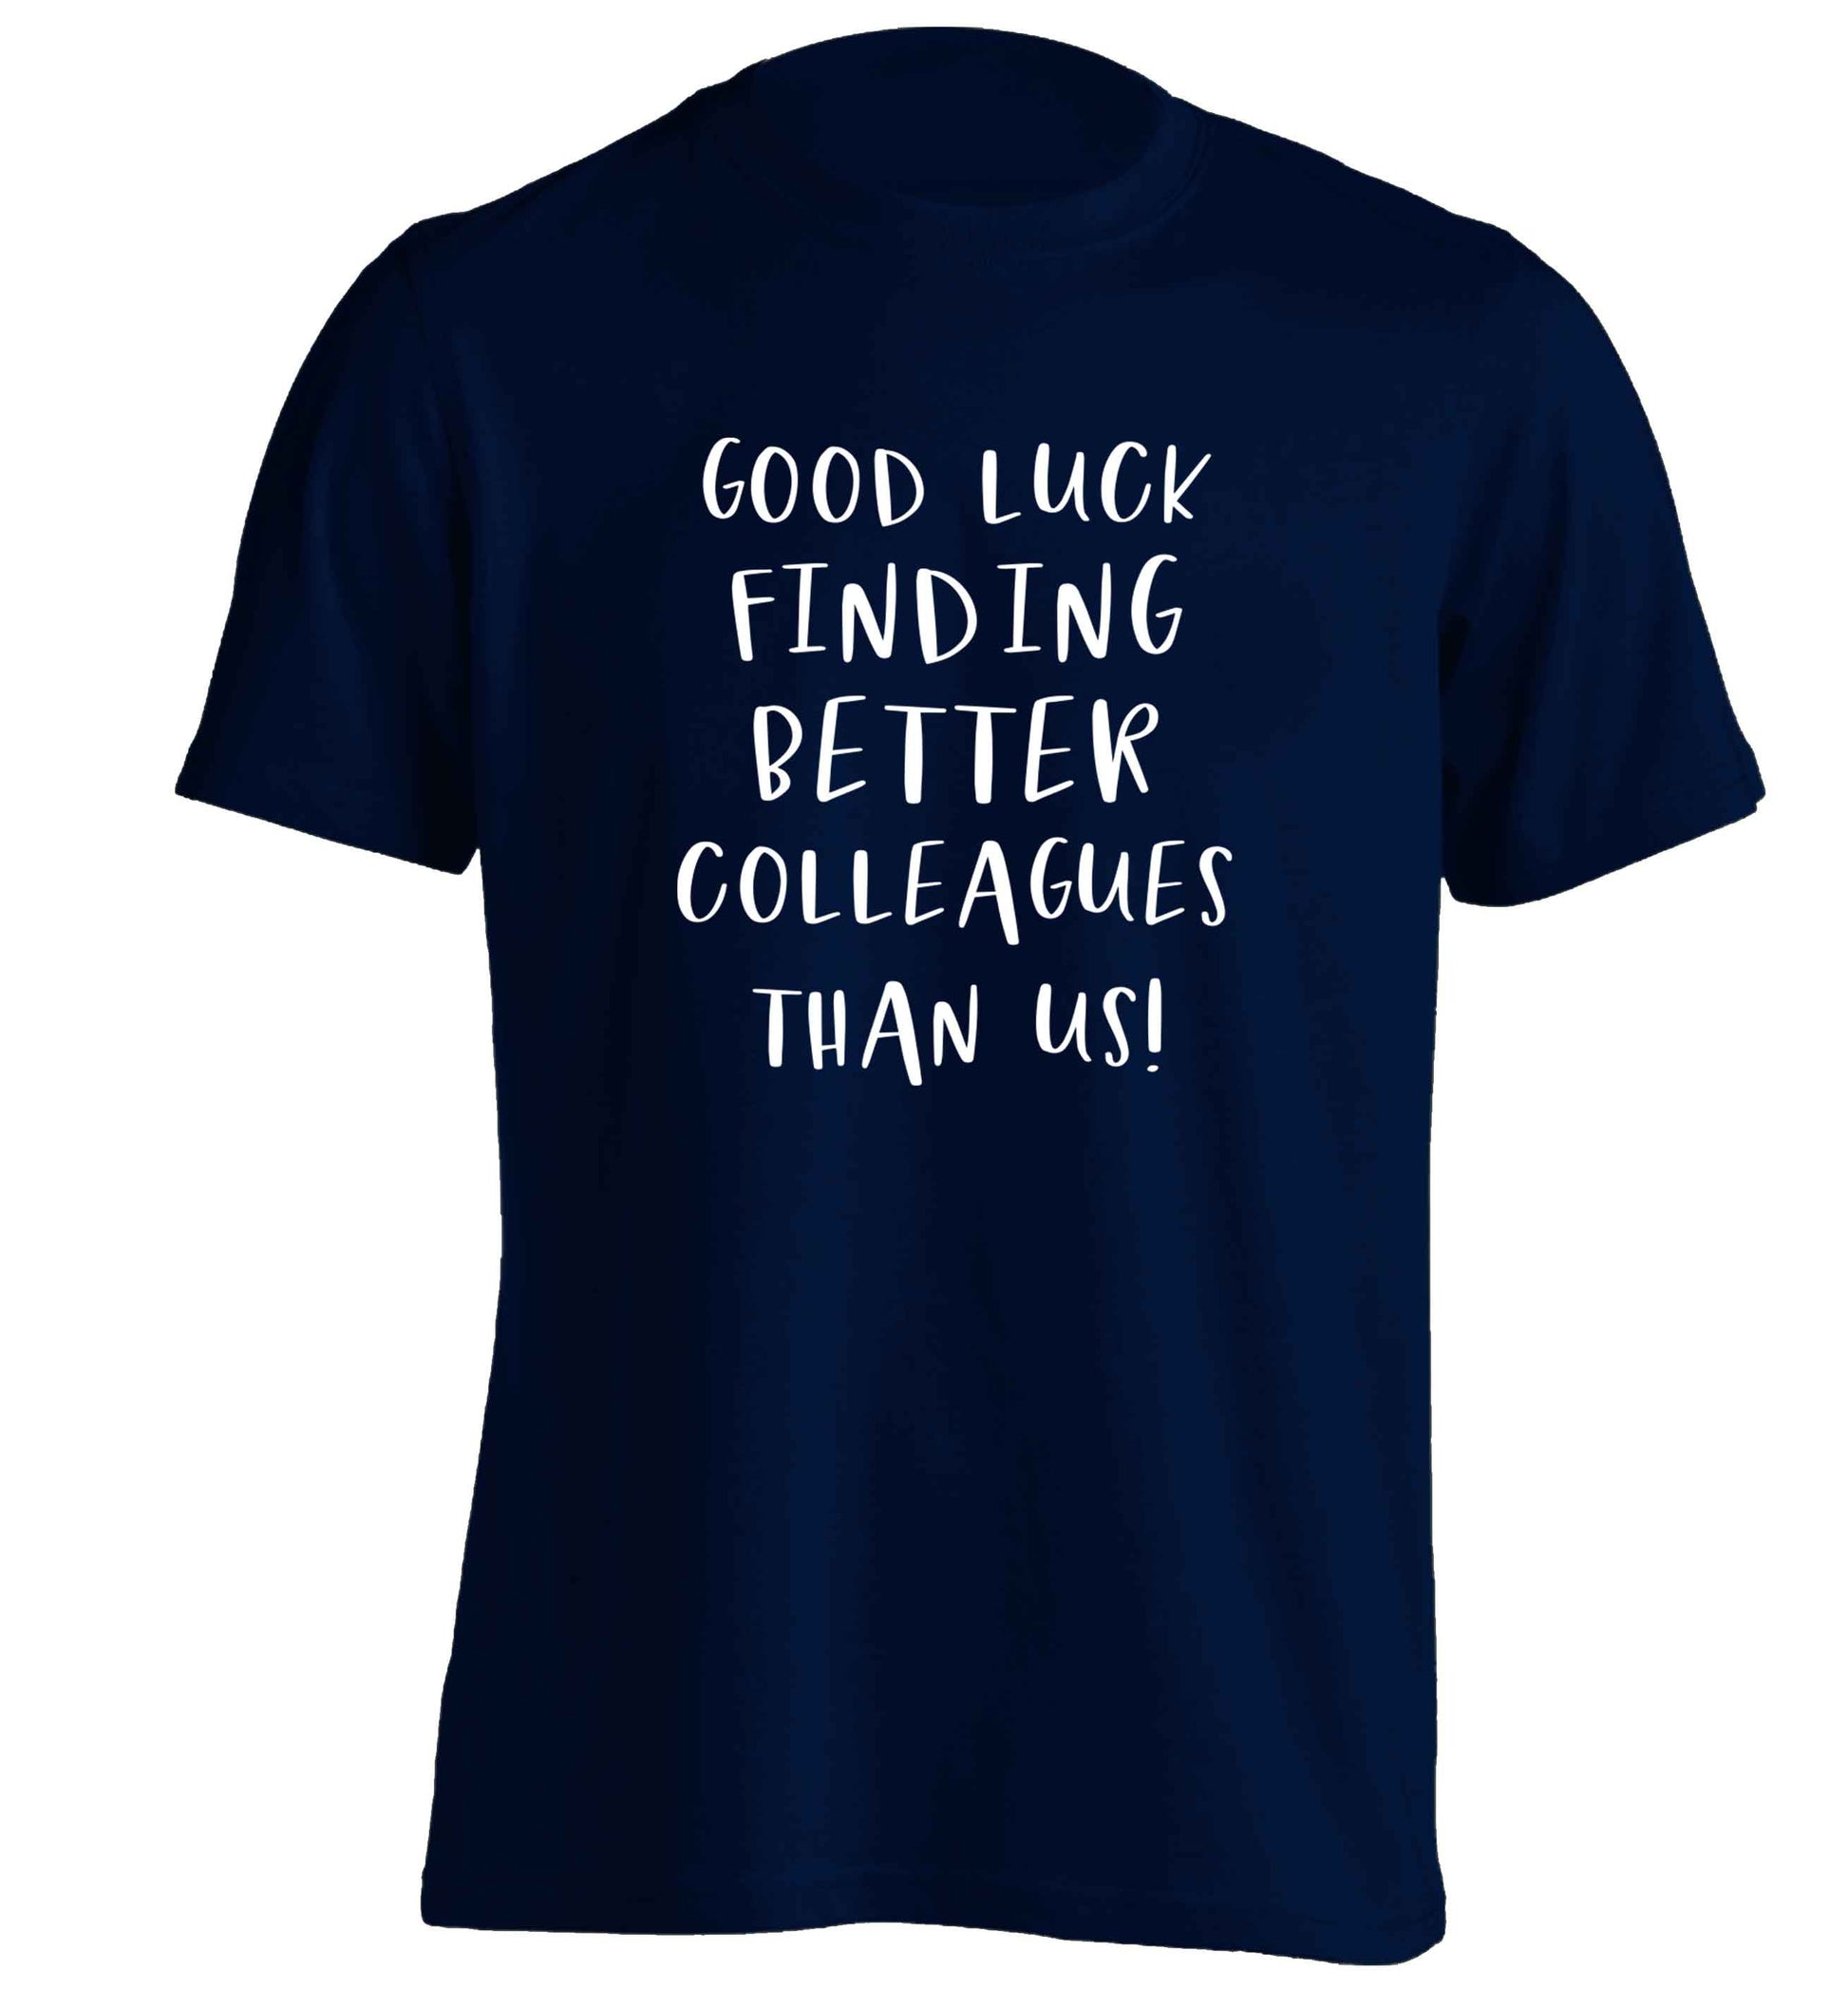 Good luck finding better colleagues than us! adults unisex navy Tshirt 2XL